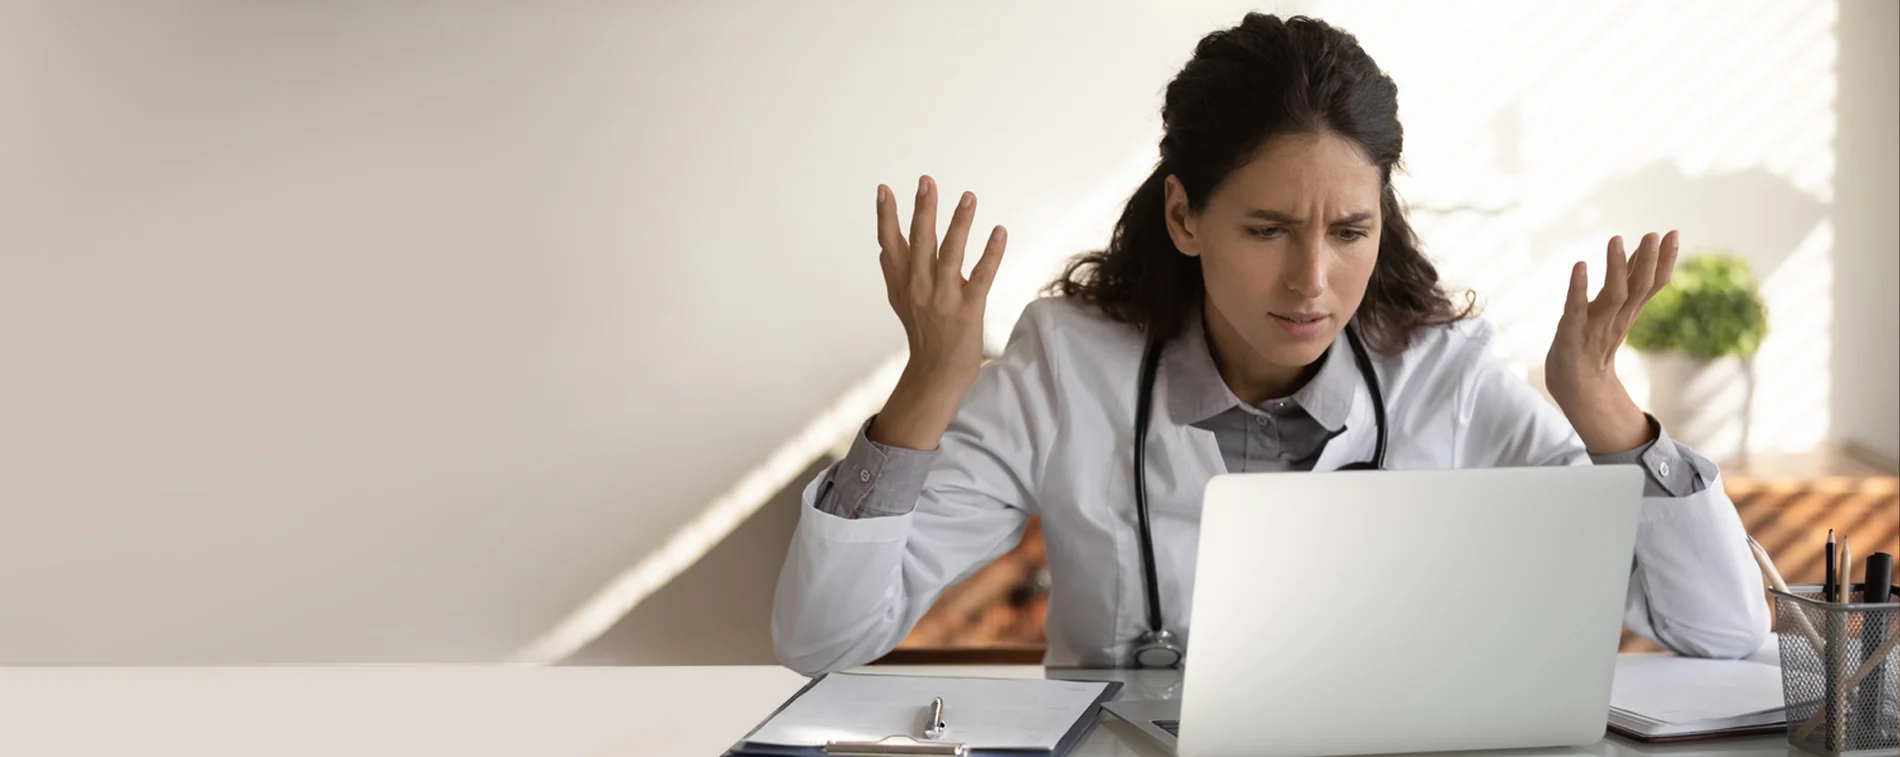 Changes in Doctors’ Moods Can Increase the Likeliness of Medical Errors